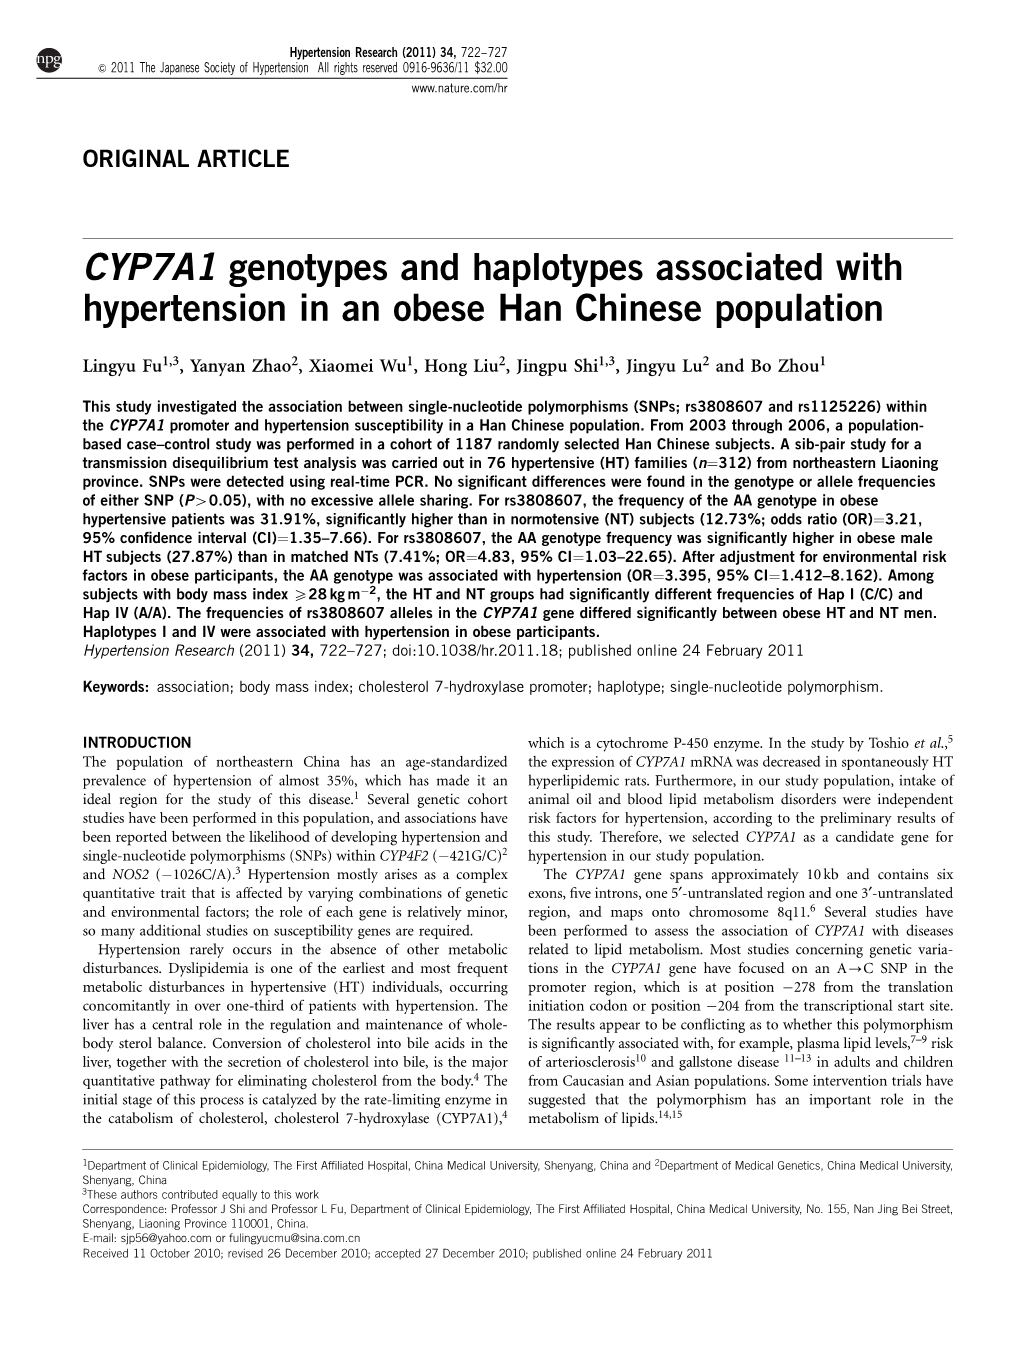 CYP7A1 Genotypes and Haplotypes Associated with Hypertension in an Obese Han Chinese Population